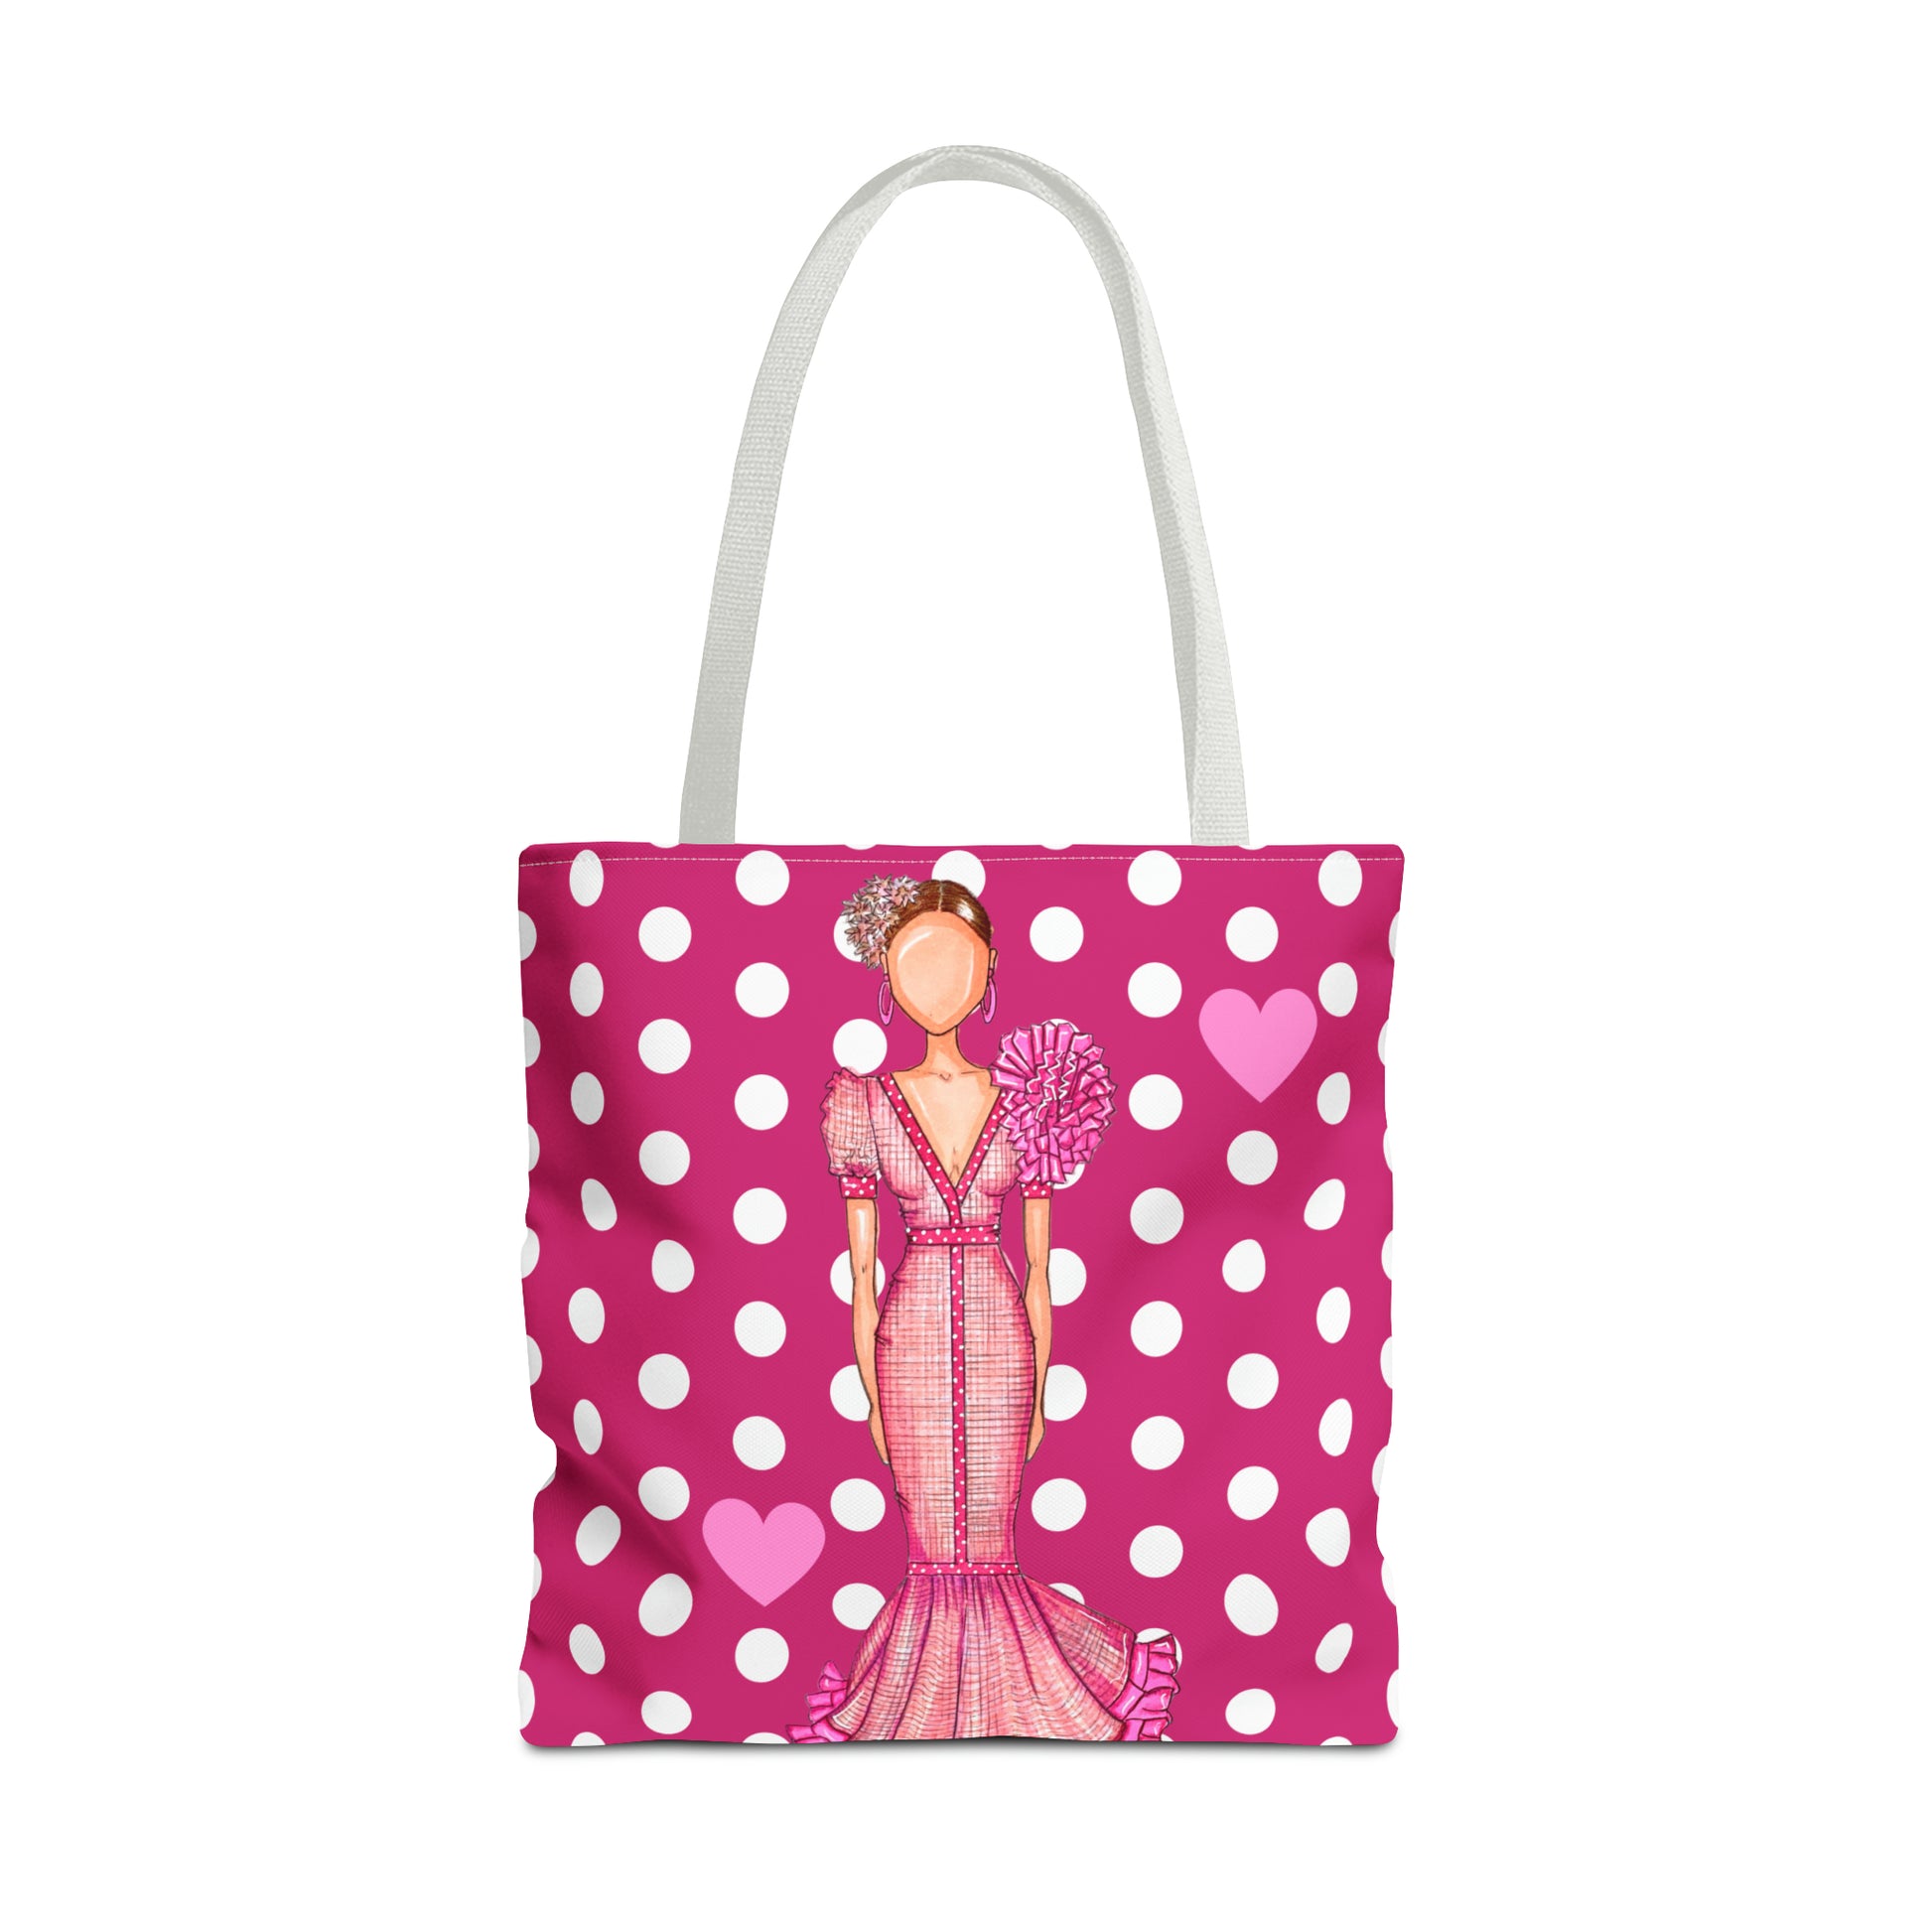 a pink and white polka dot bag with a lady holding a fan